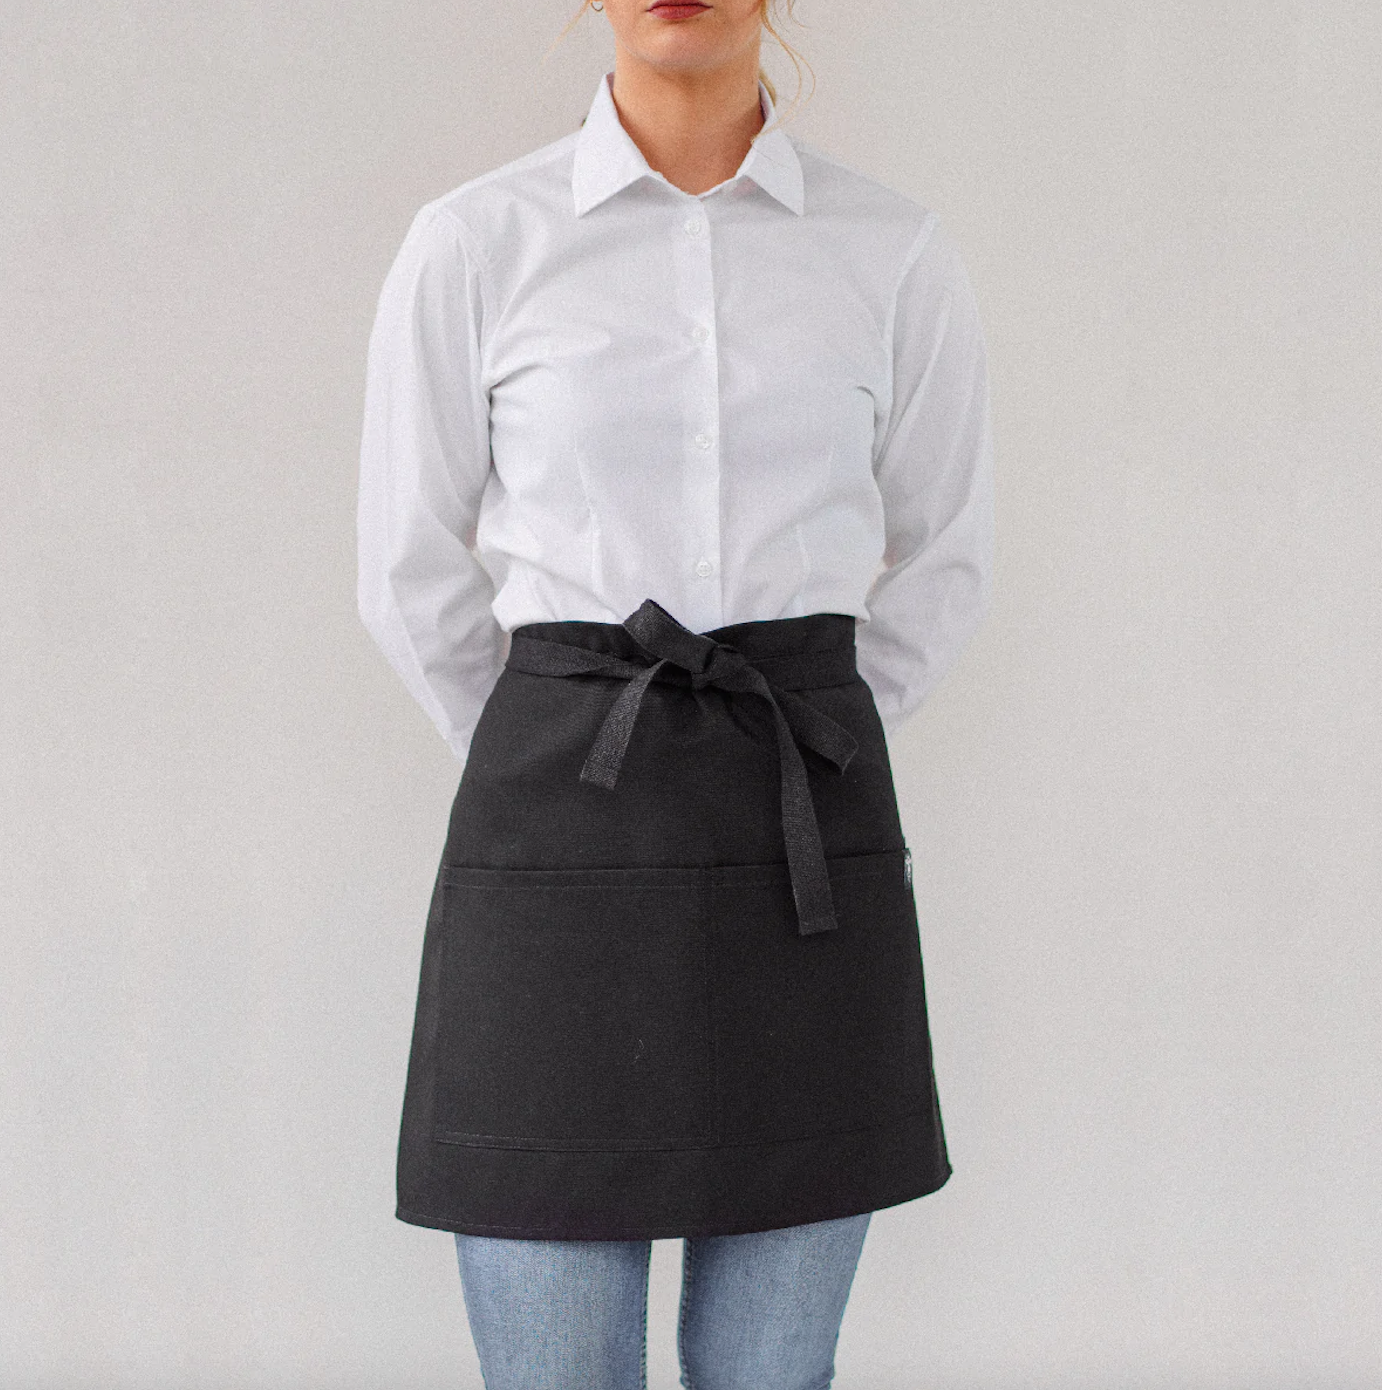 13 Different Types of Apron Styles – Stock Mfg. Co.